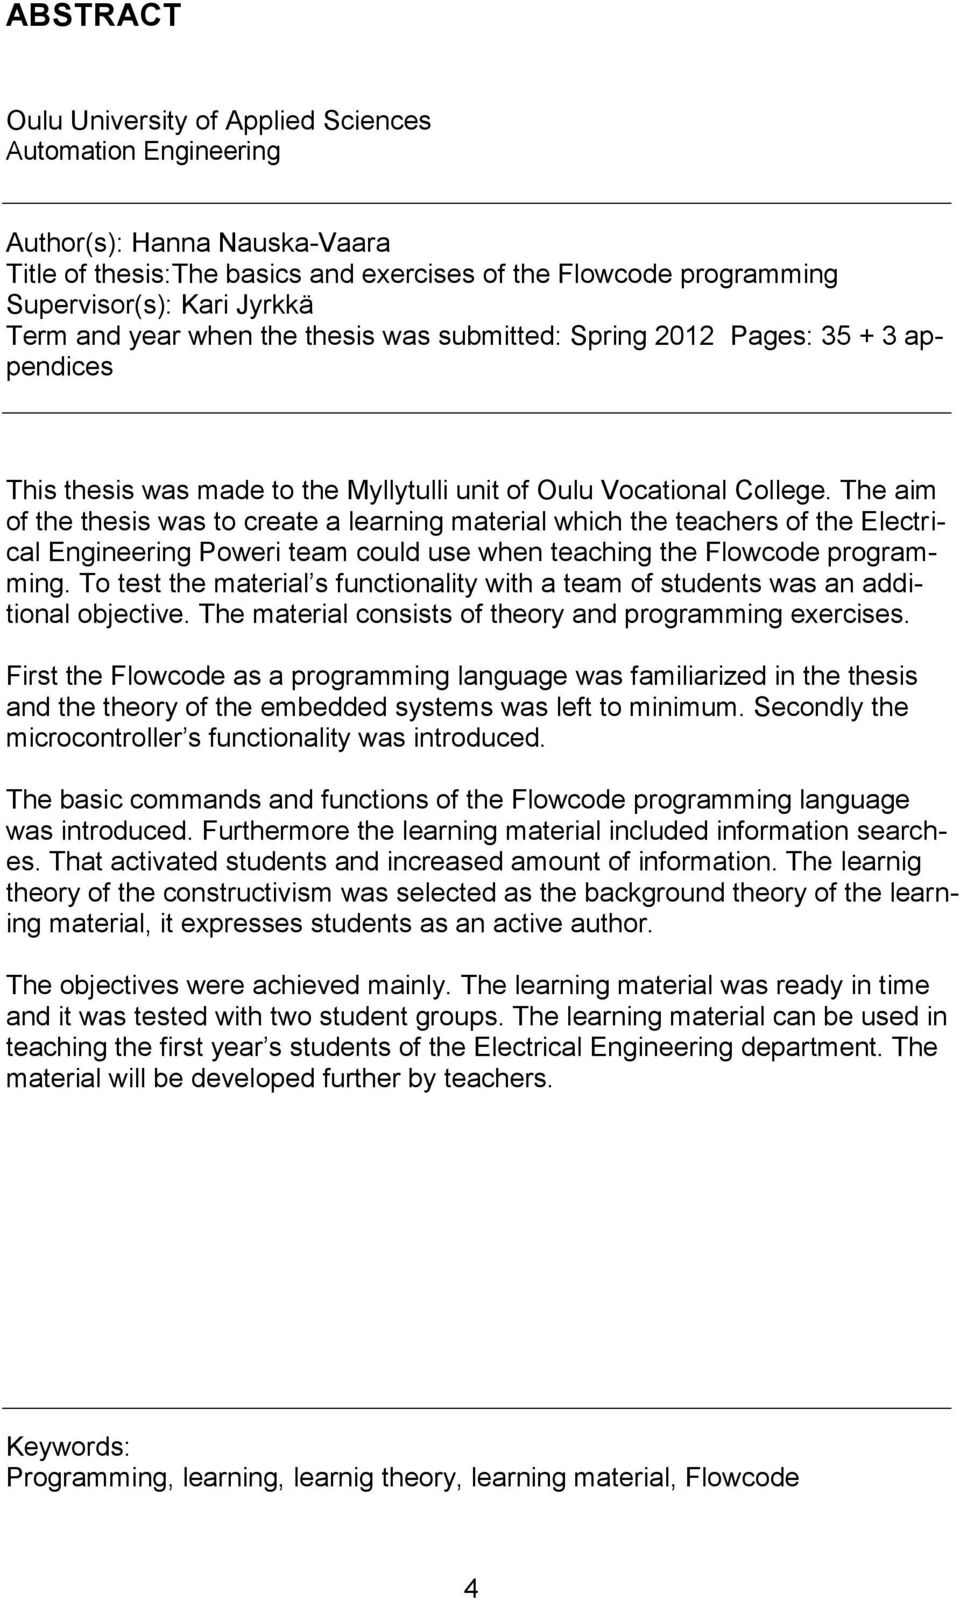 The aim of the thesis was to create a learning material which the teachers of the Electrical Engineering Poweri team could use when teaching the Flowcode programming.